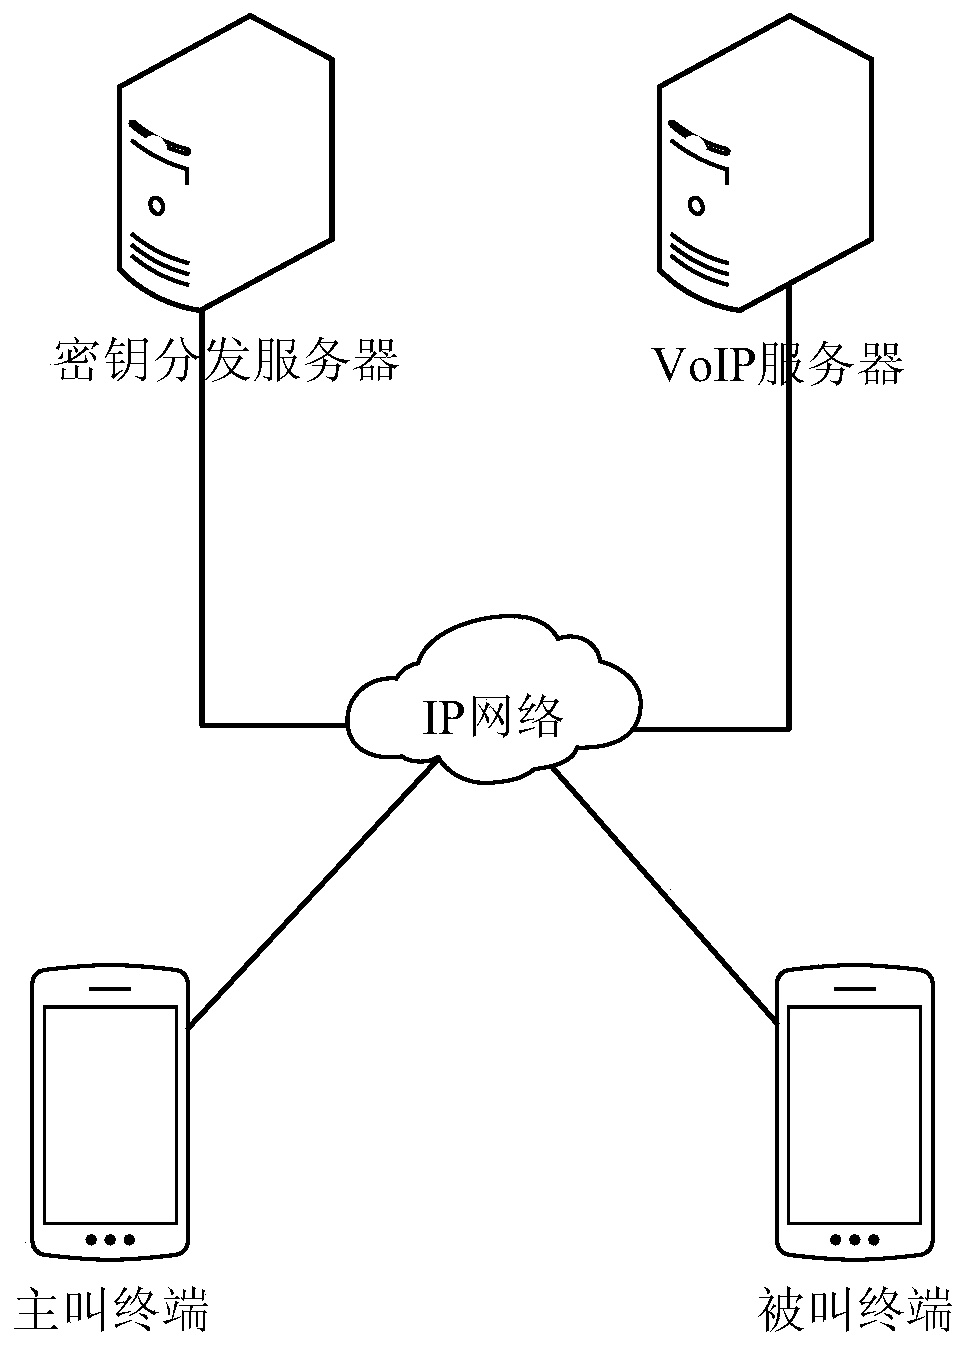 A key distribution method suitable for VoIP voice encryption